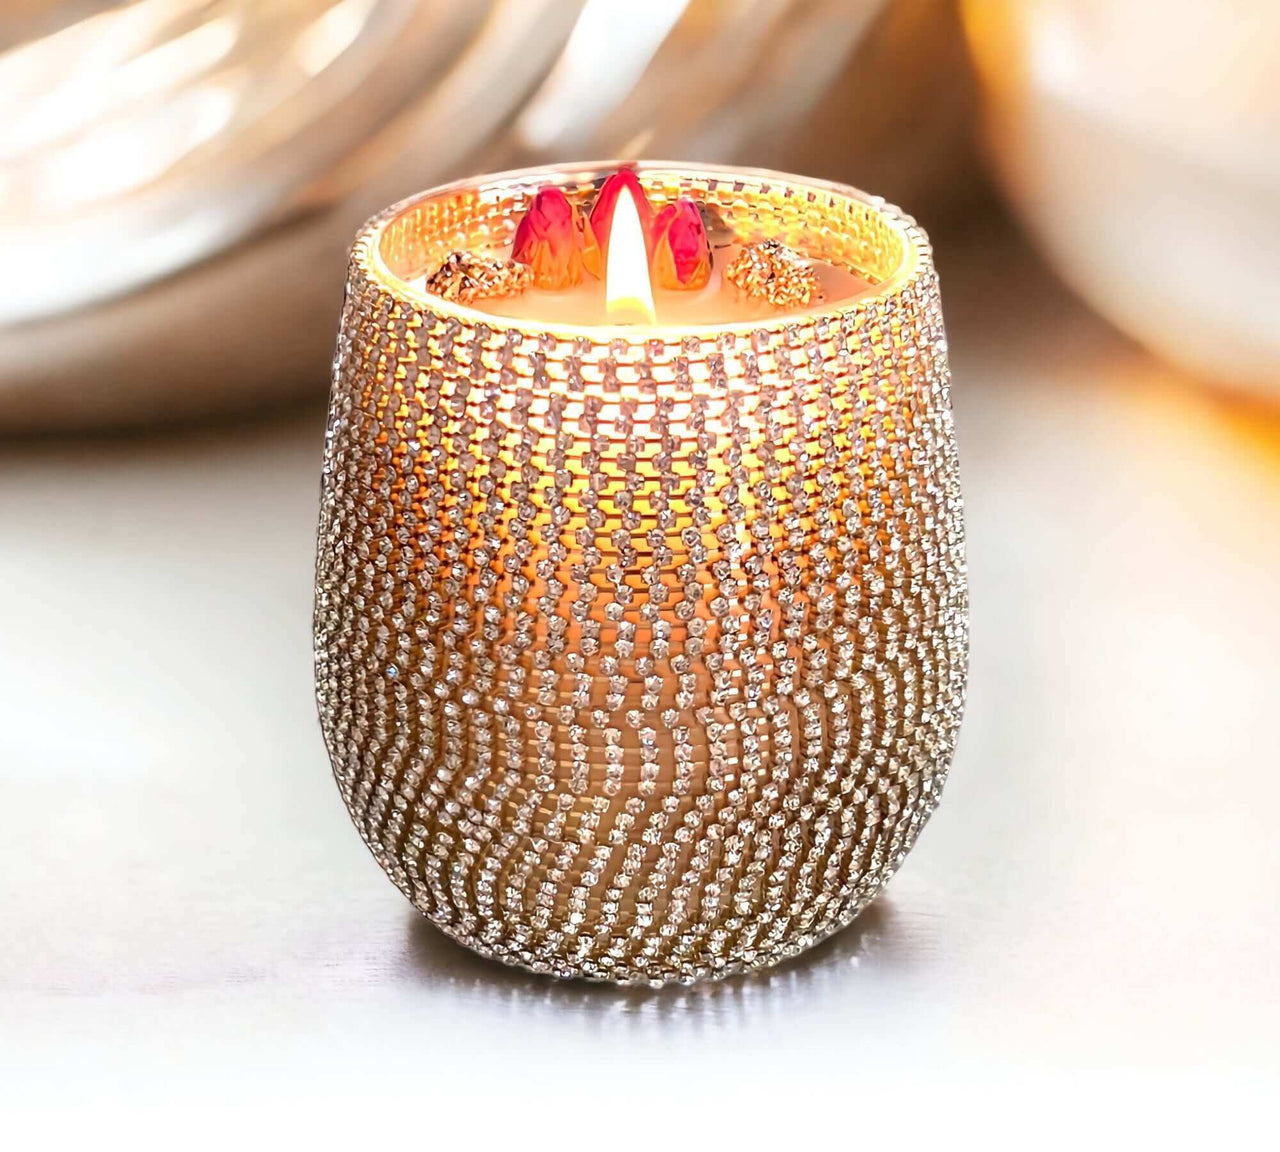 Luxury Bling Candle - Pyrite Sparkle Add glamour with the Beautiful Bling Candle, infused with Pyrite.